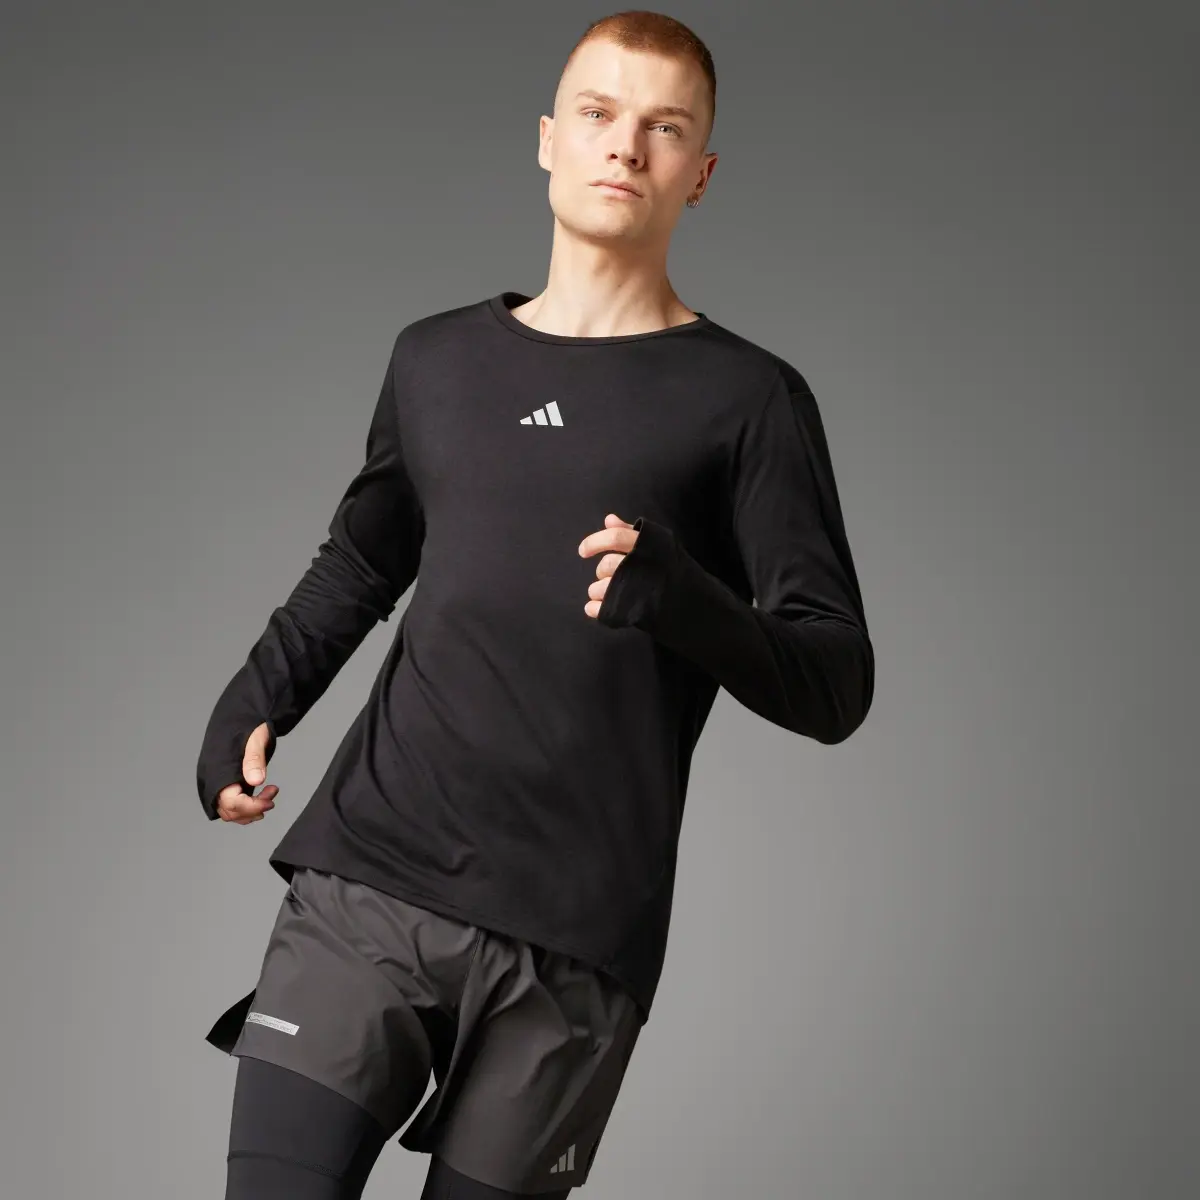 Adidas Ultimate Running Conquer the Elements Merino Long Sleeve Shirt. 1